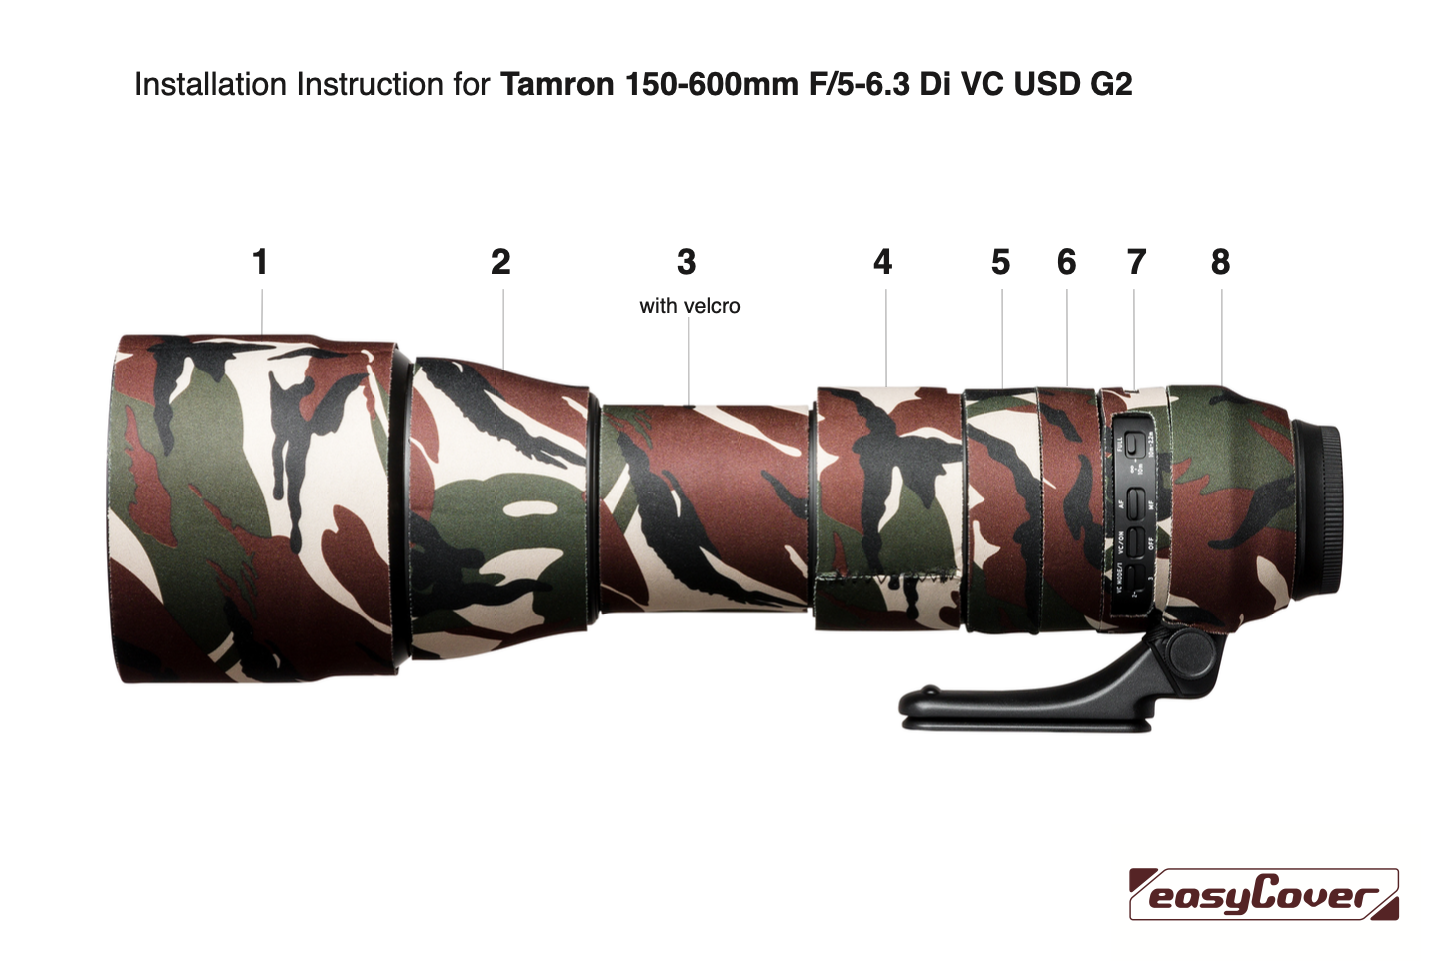 Install Instruction for Oak_Tamron 150-600 5-6.3 Di VC USD G2.png